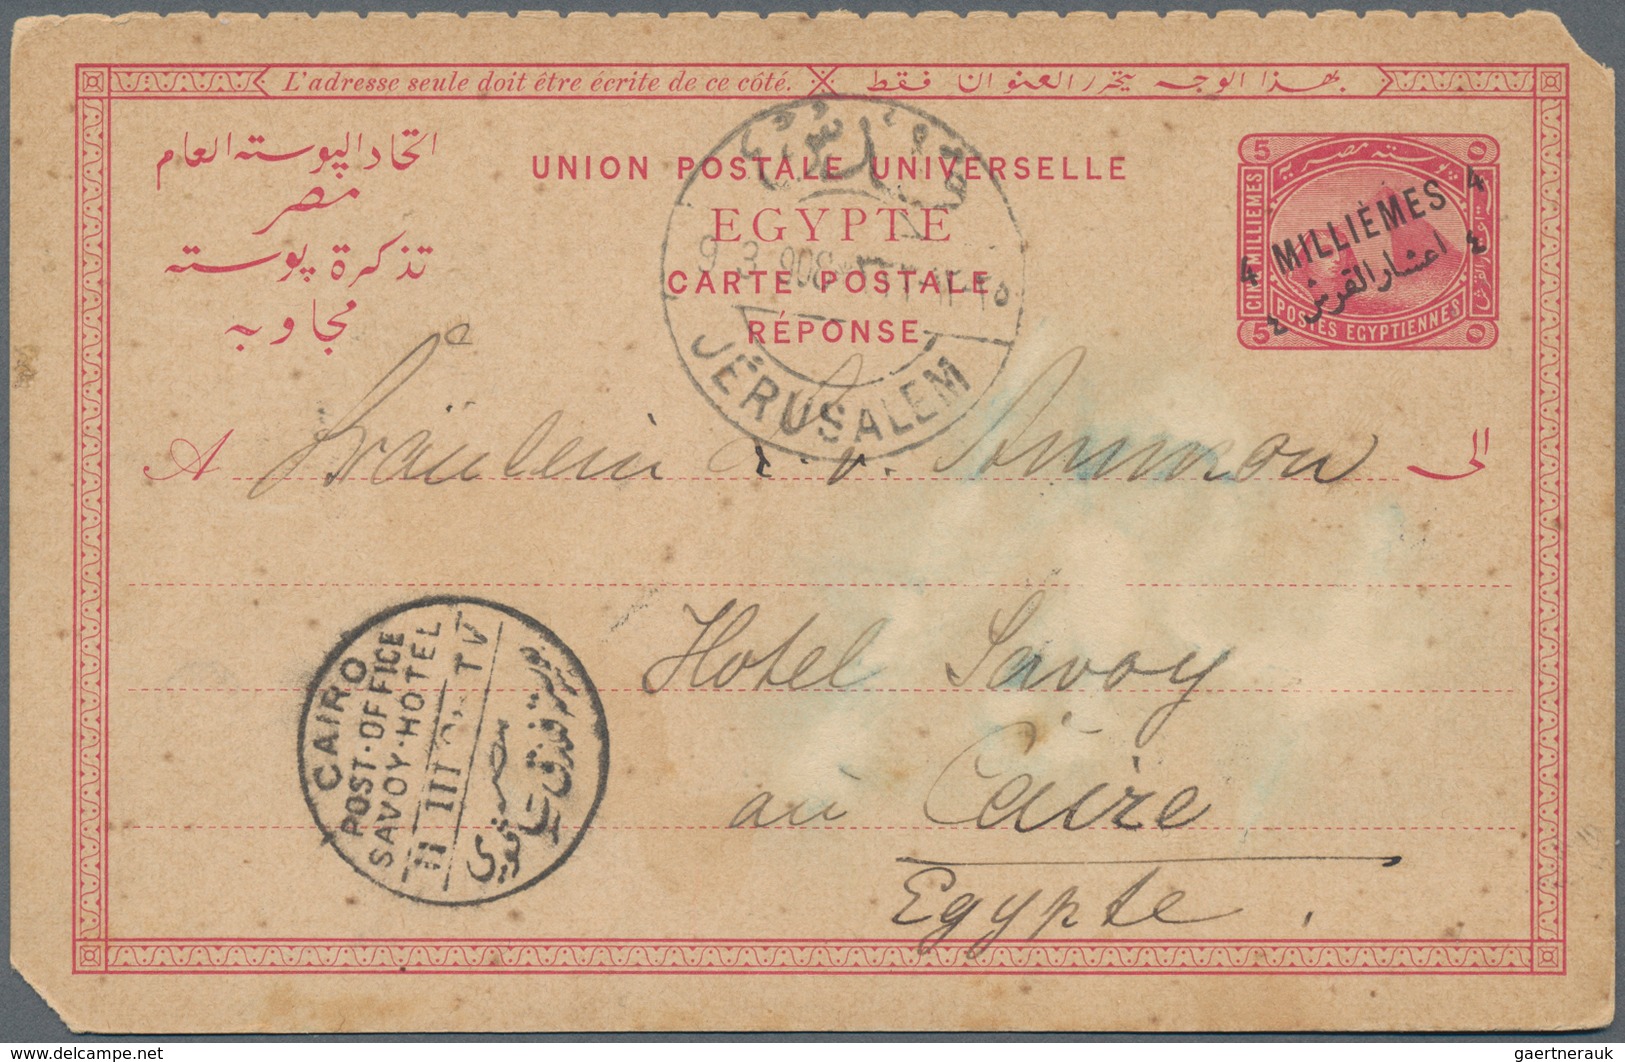 Holyland: 1658-1950 ca.: Specialized collection of about 150 covers, letters, postcards, postal stat